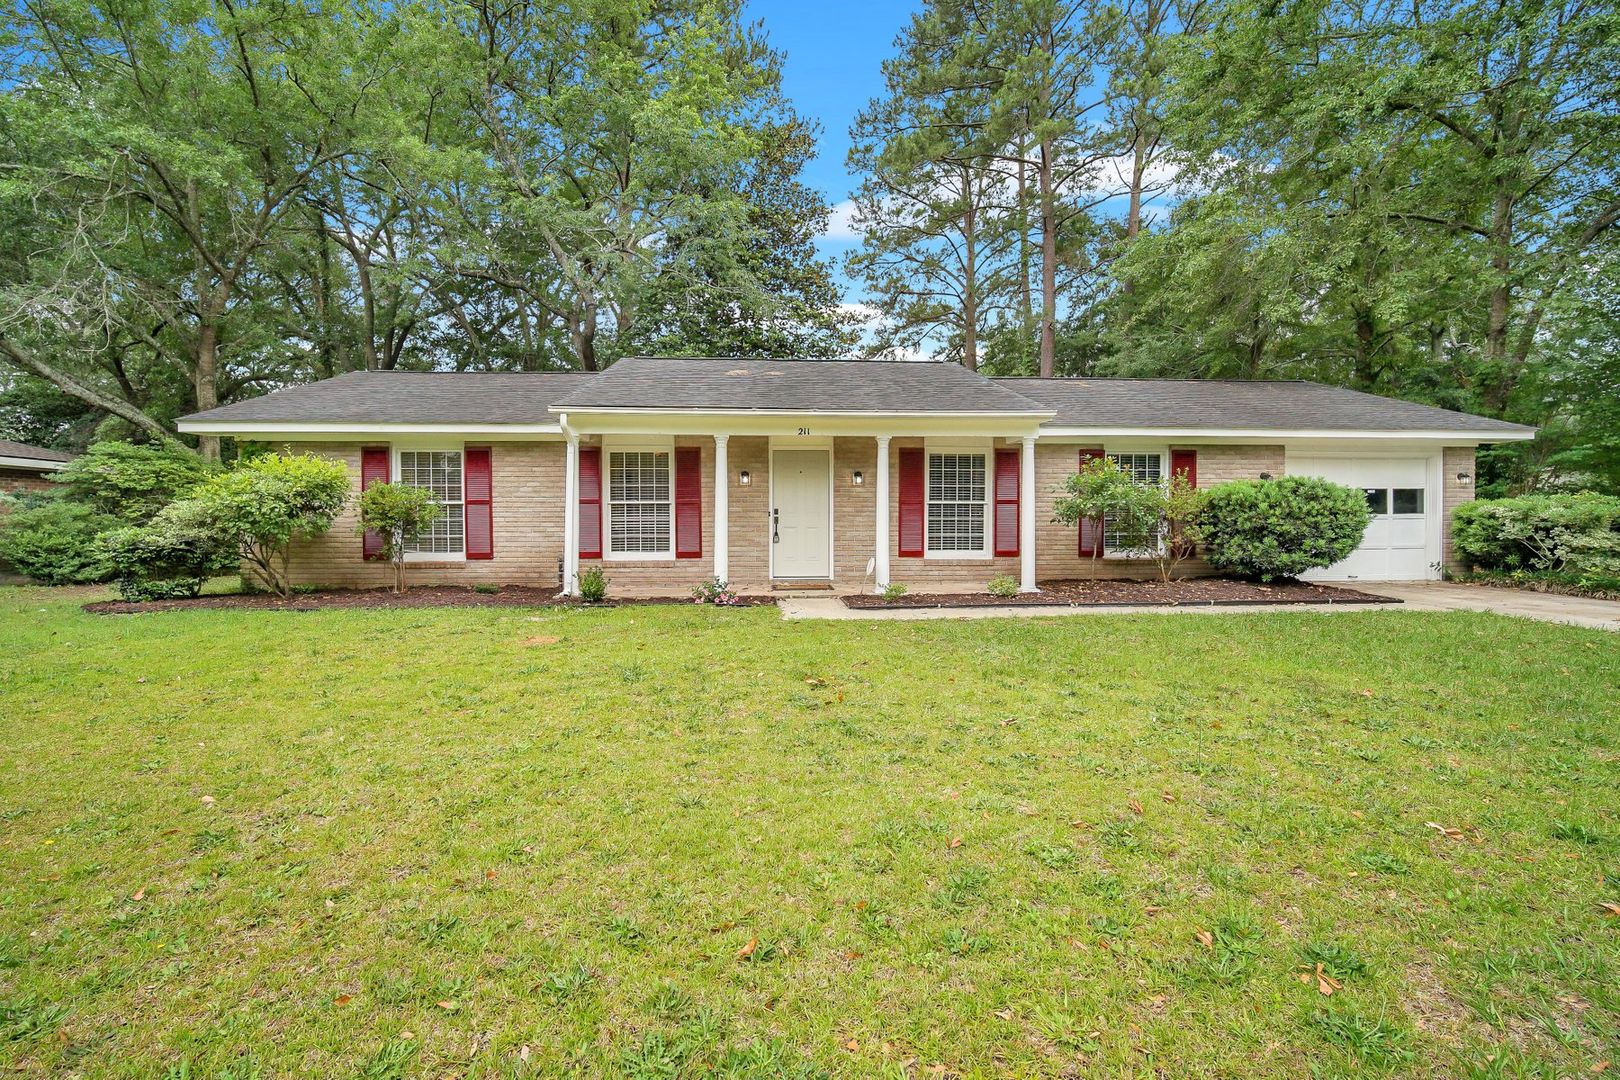 Welcome Home to 211 Elizabeth Street in Hinesville, Georgia!